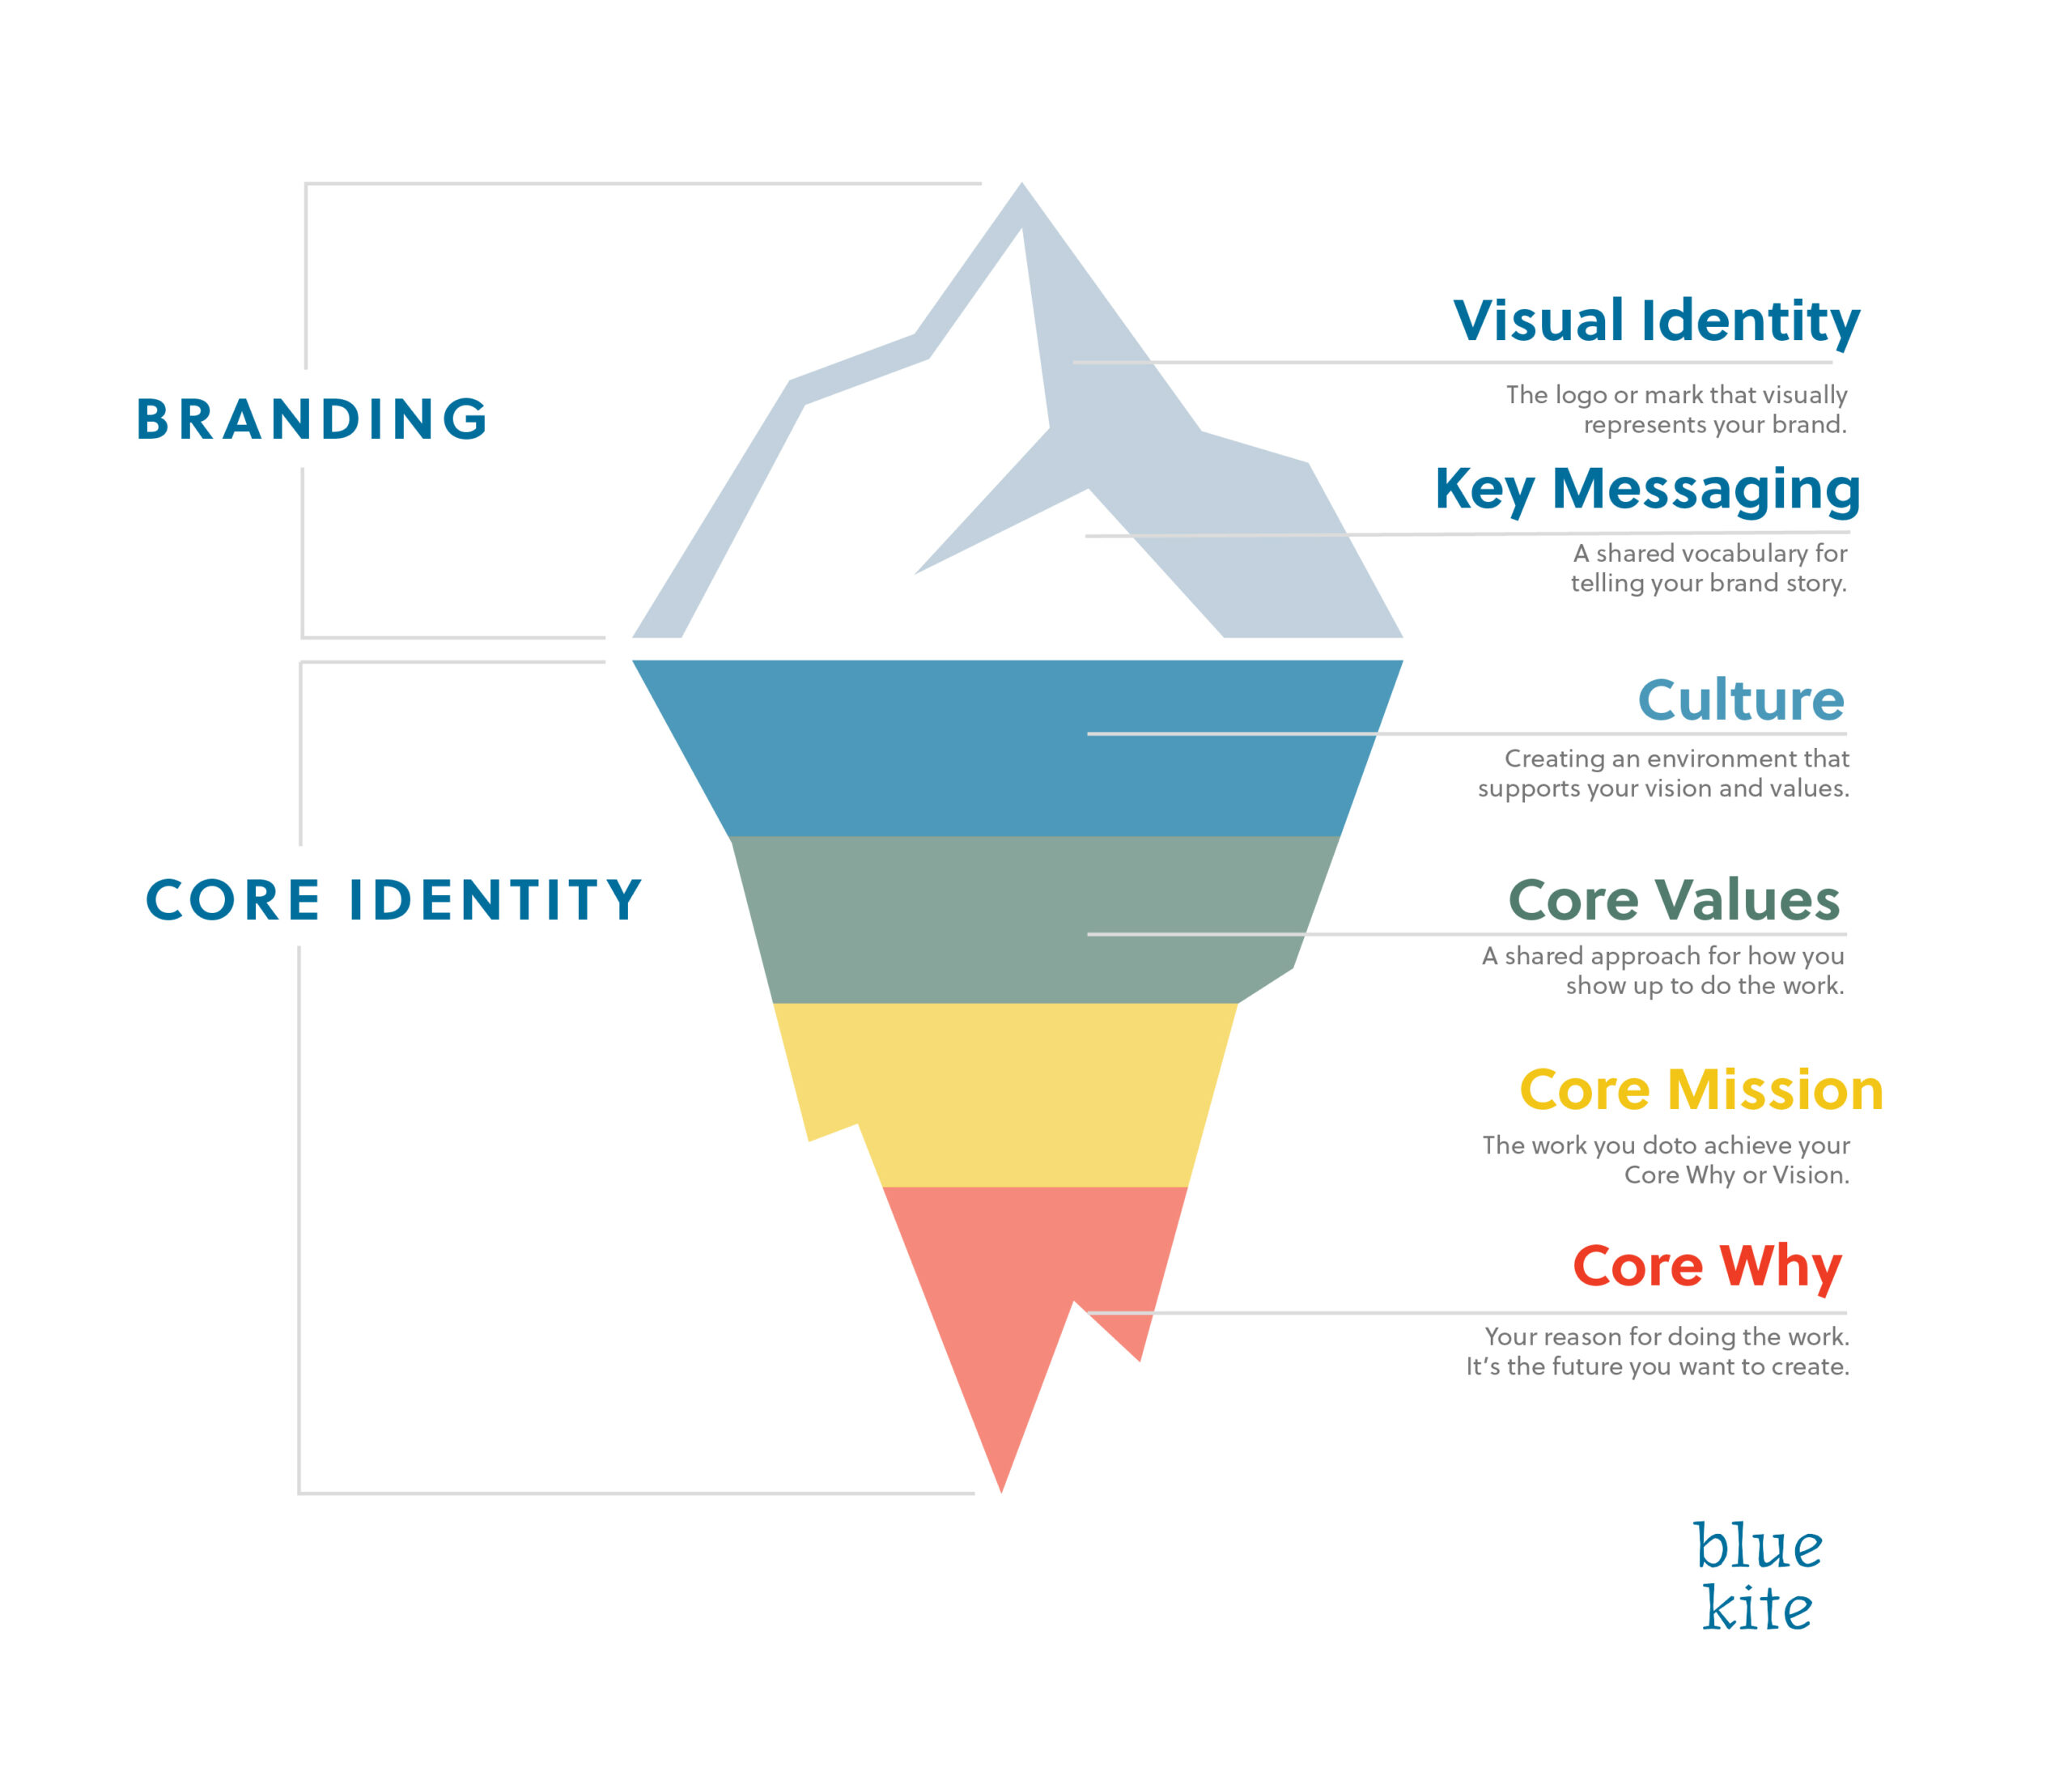 Visual branding is just the tip of the iceberg. Underneath the surface if your core identity of your brand.